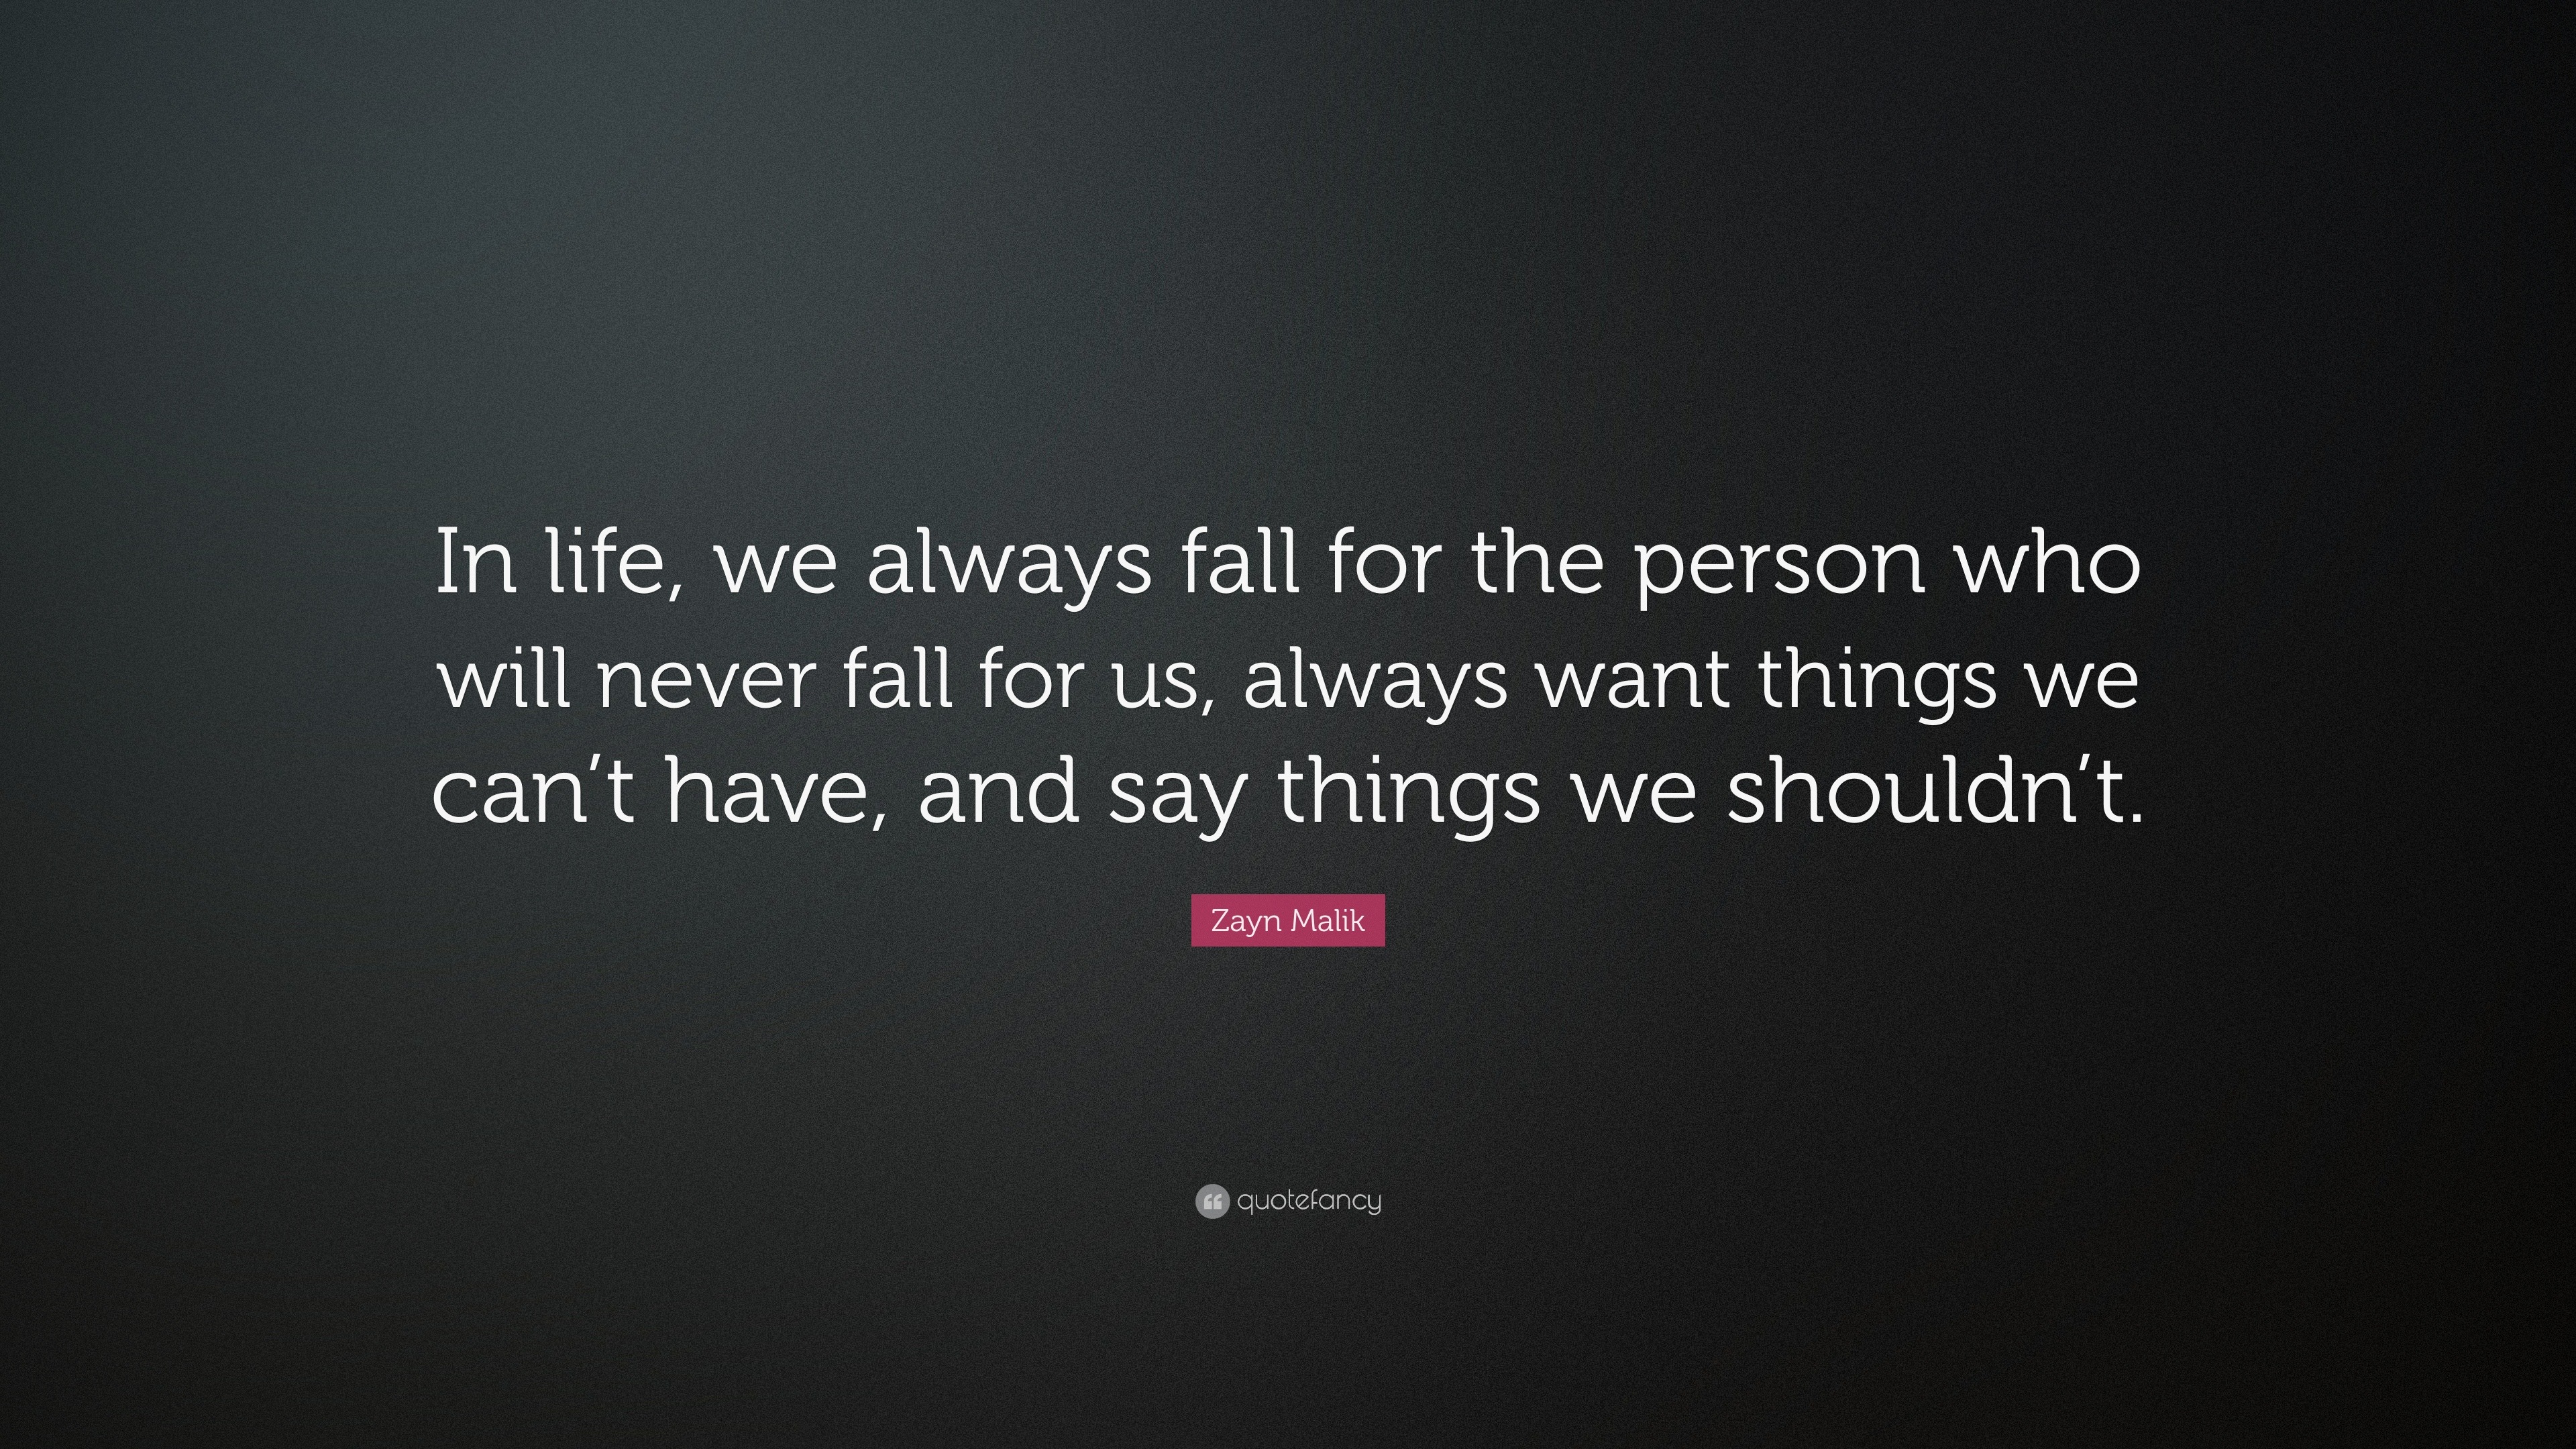 Zayn Malik Quote “In life we always fall for the person who will